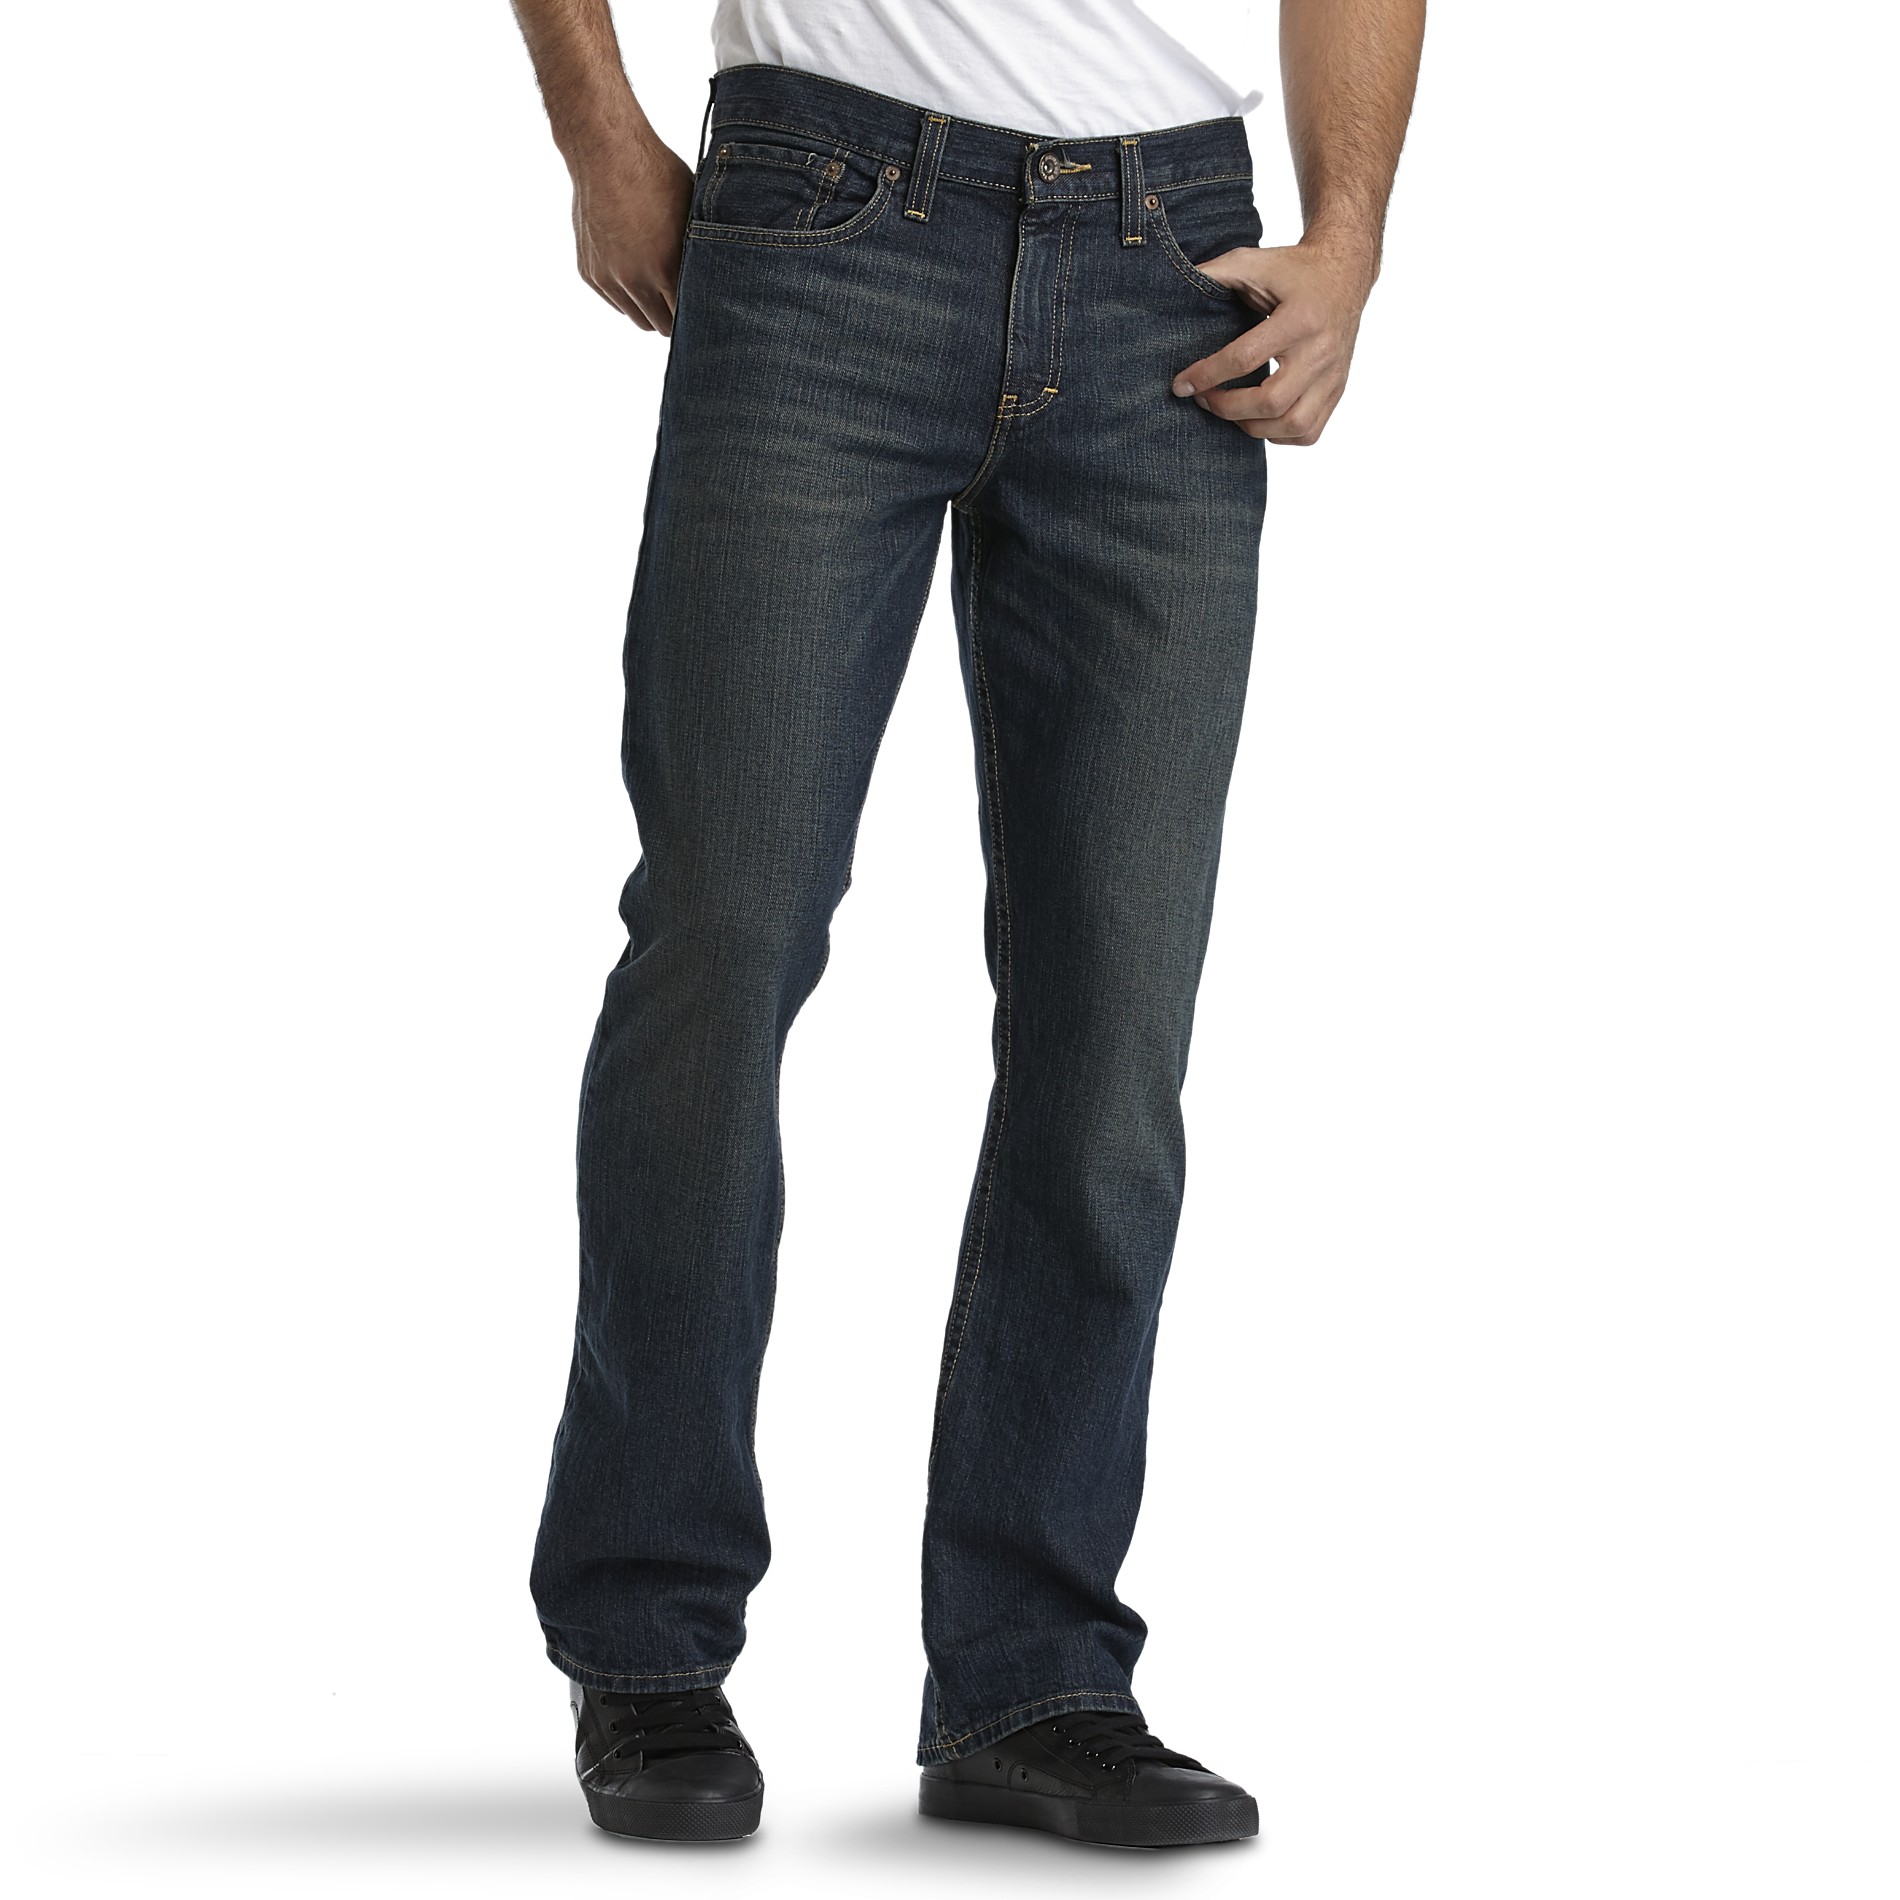 Mens Low Rise Bootcut Jeans: Quality from Kmart